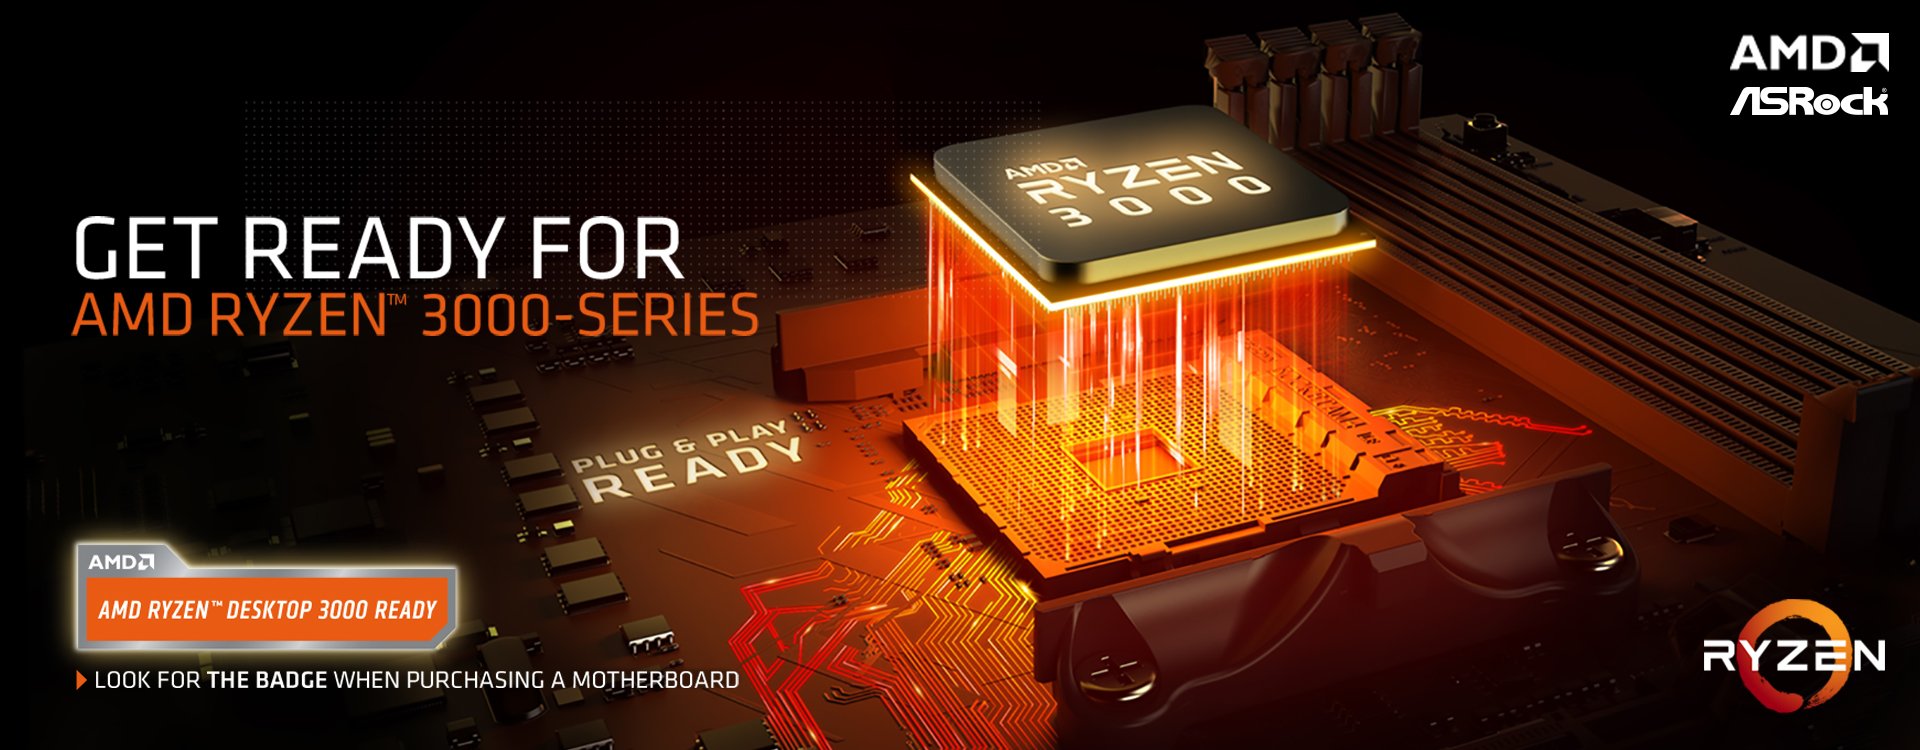 AMD Ryzen 3000 Series banner that shows a graphic of a motherboard with the AMD Ryzen 3000 CPU Approaching the Socket with Light and streaming geometric graphics in between. There is also text that reads: GET READY FOR AMD RYZEN 3000-SERIES -  AMD RYZEN DESKTOP 3000 READY - PLUG & PLAY READY - LOOK FOR THE BADGE WHEN PURCHASING A MOTHERBOARD